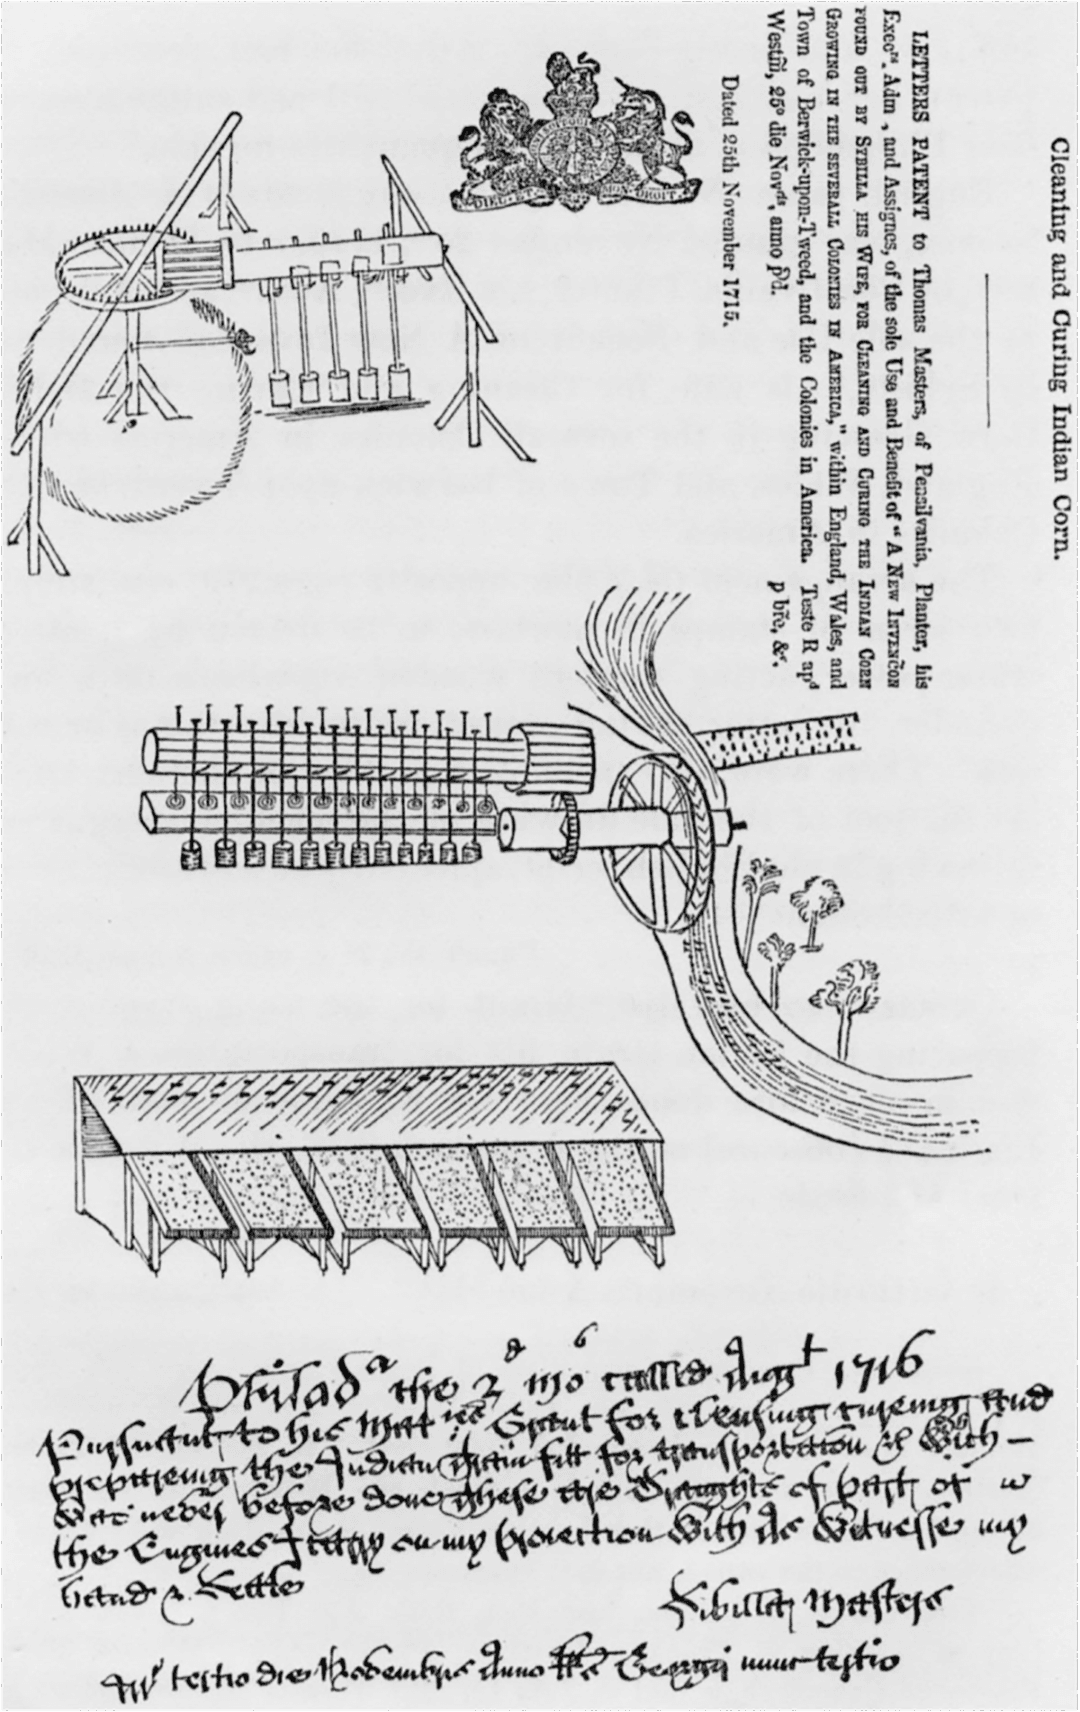 Sybilla Masters patent for cleaning and curing corn, Nov. 25, 1715. (Public Domain)